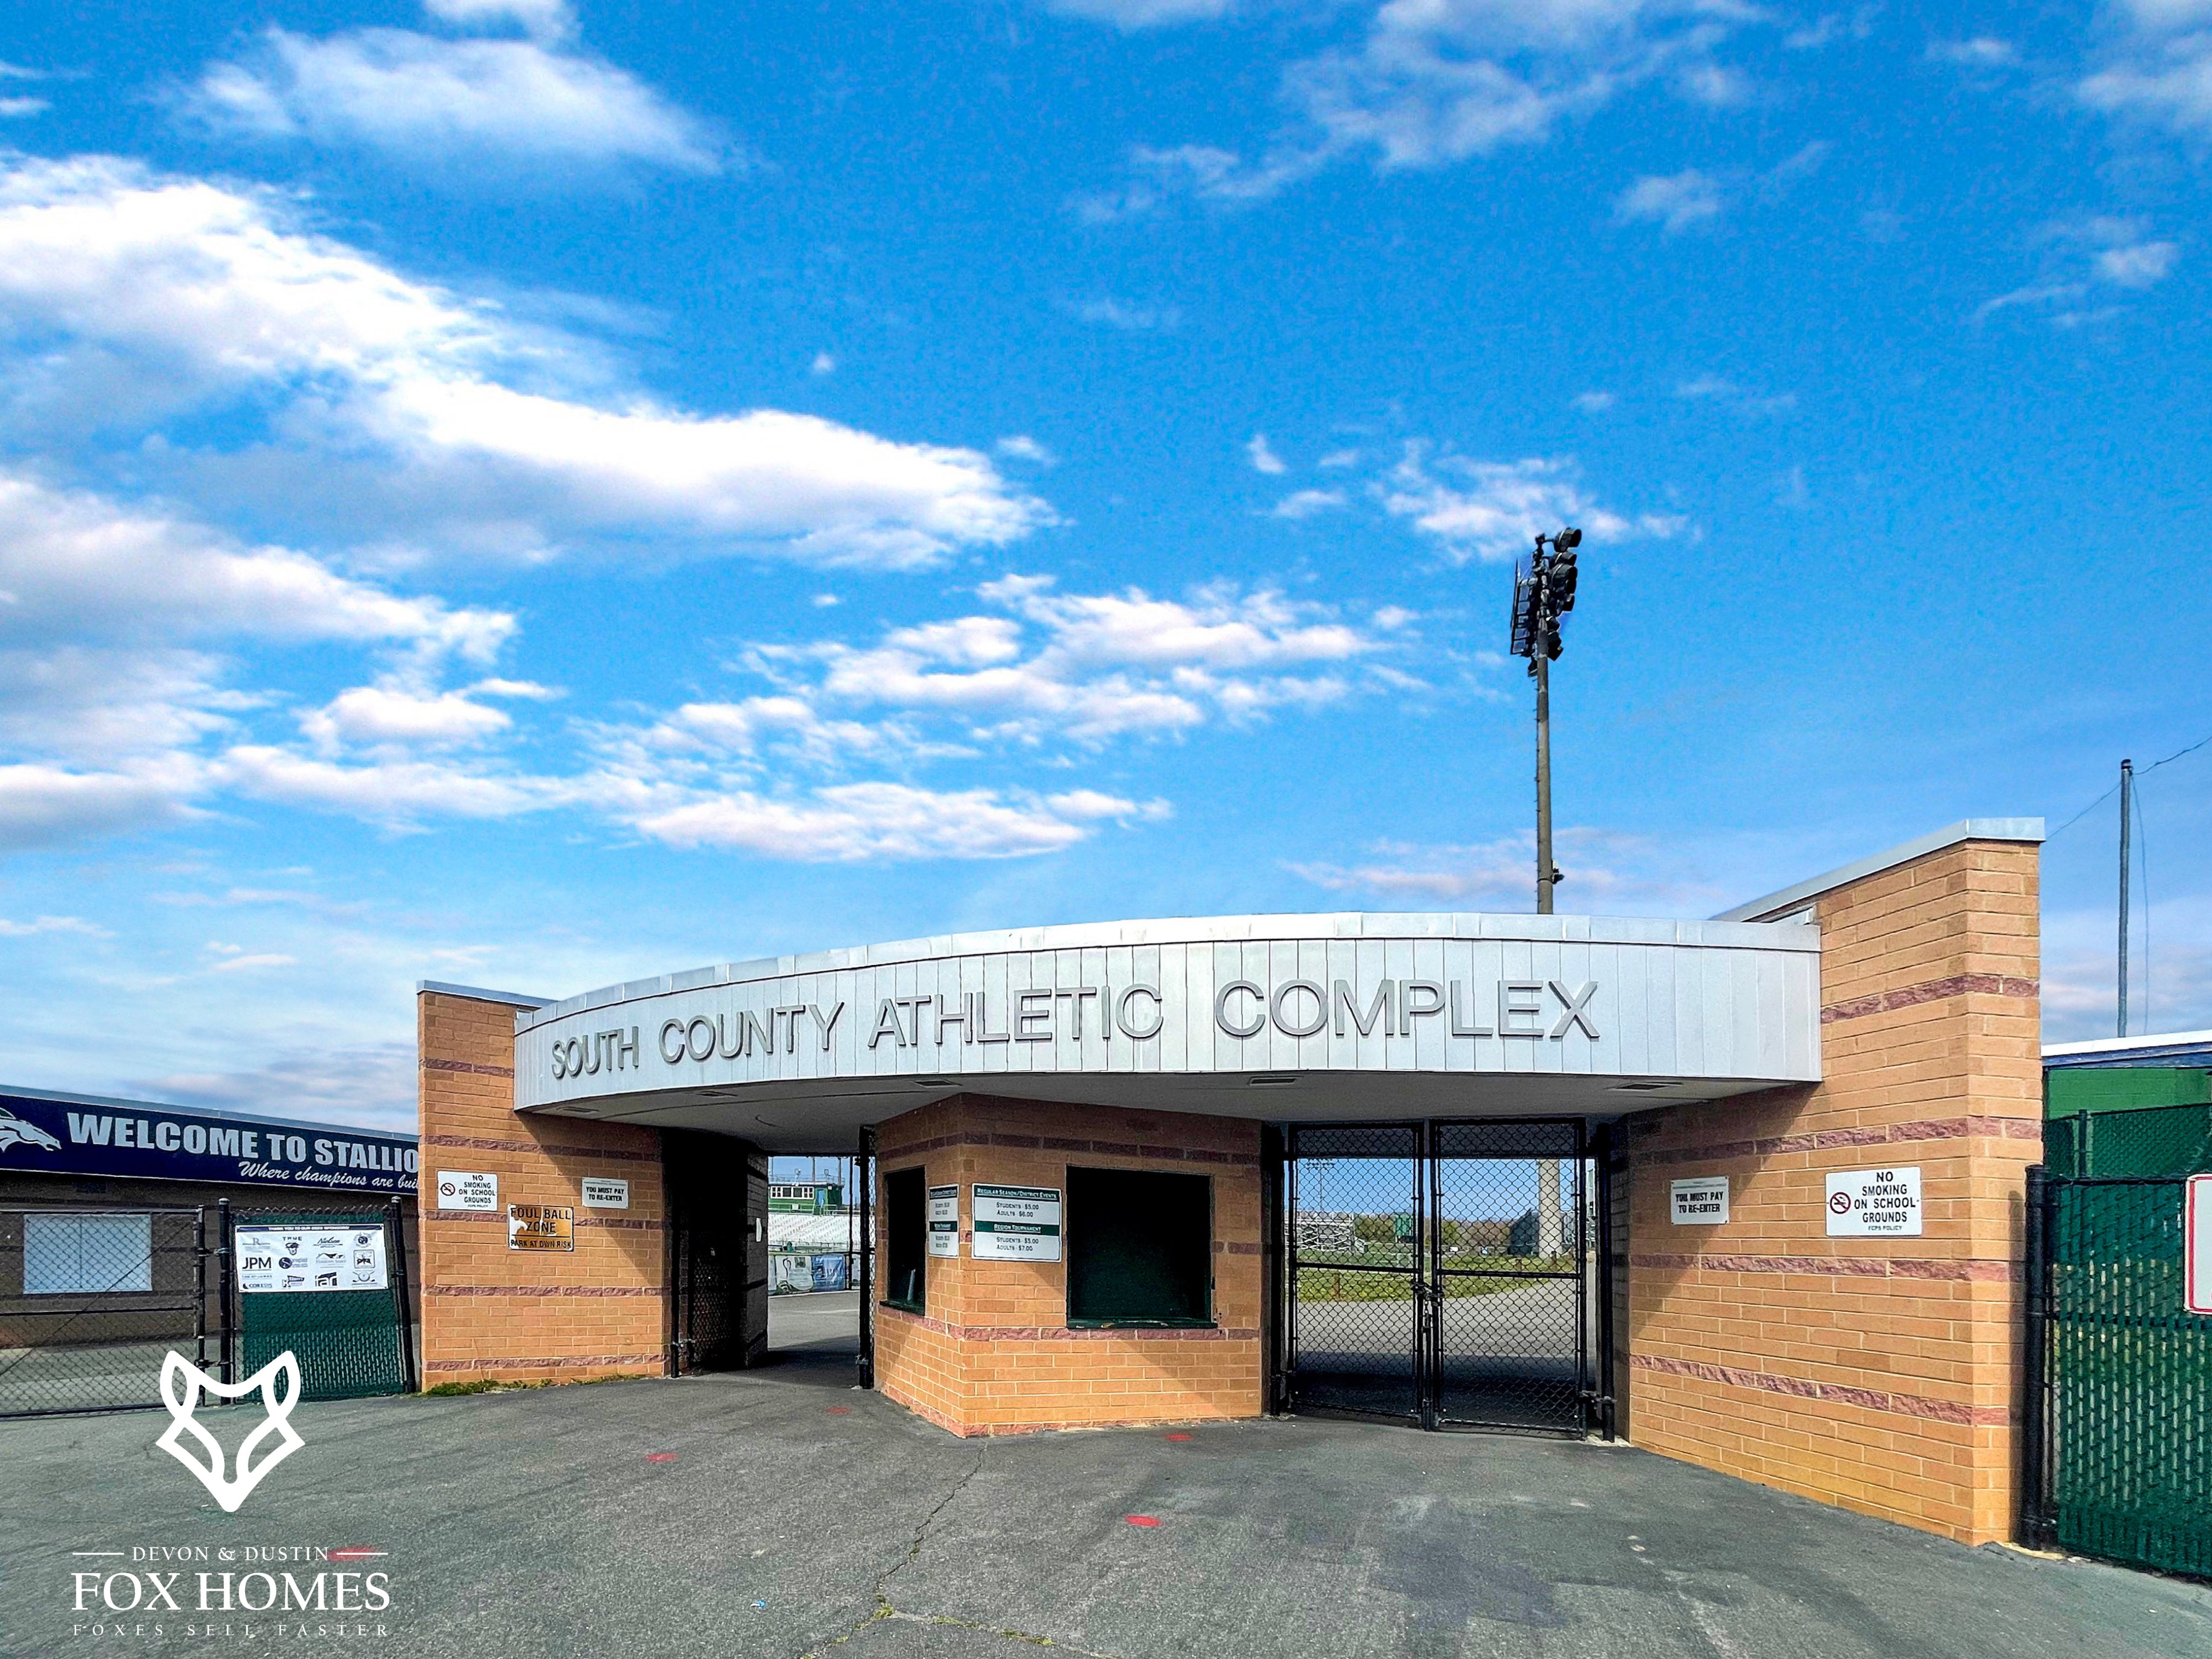 Homes-For-Sale-In-South-County-School-District-Devon-and-Dustin-Fox-Fox-Homes-Team-Athletic-Complex